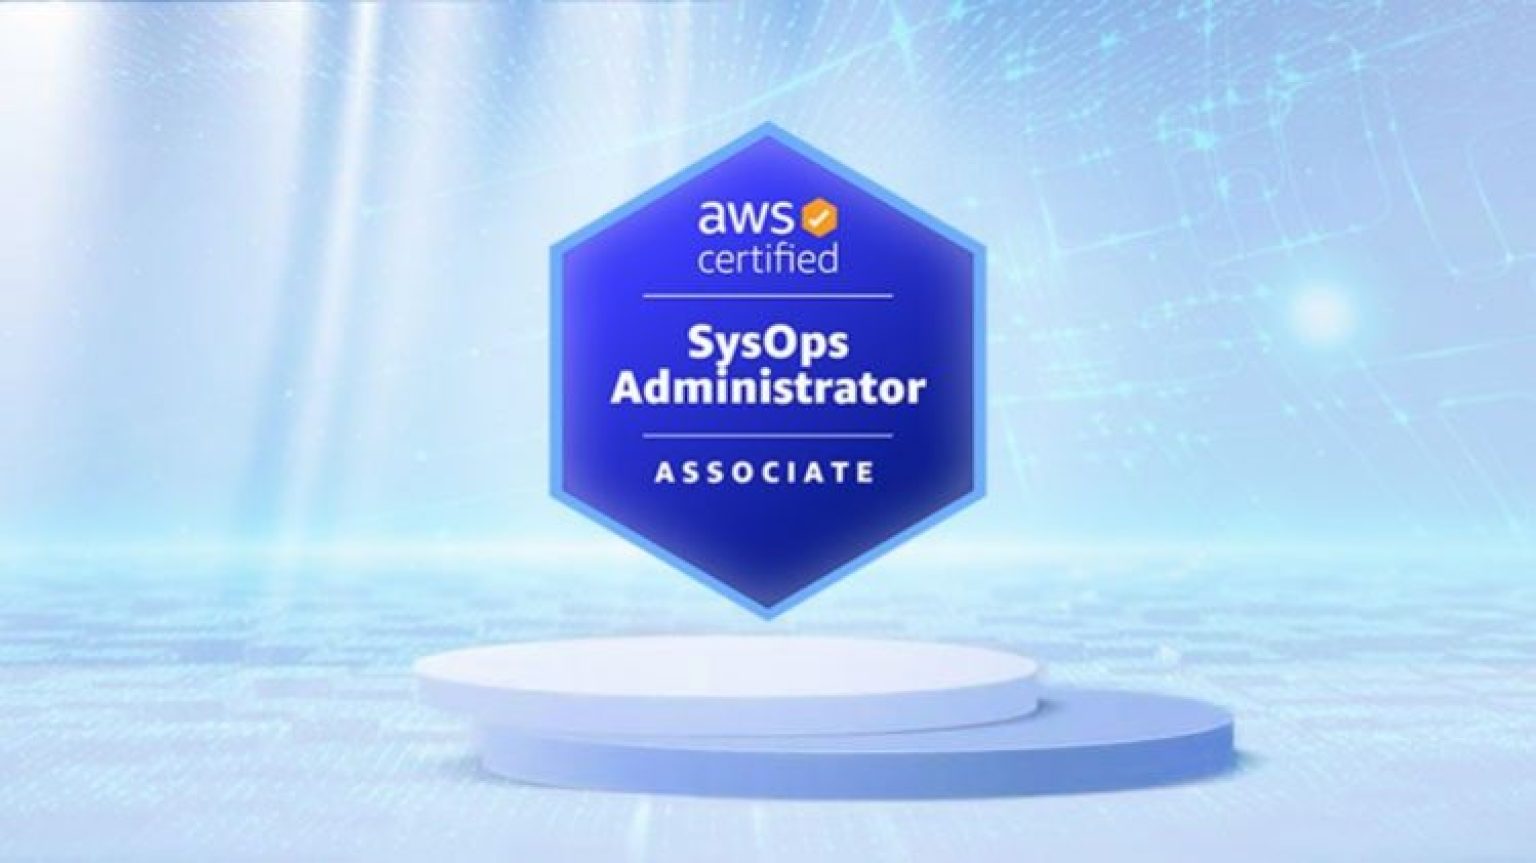 [100% OFF] AWS-SysOps Administrator Exam 2022 with Certificate of Completion - Tutorial Bar